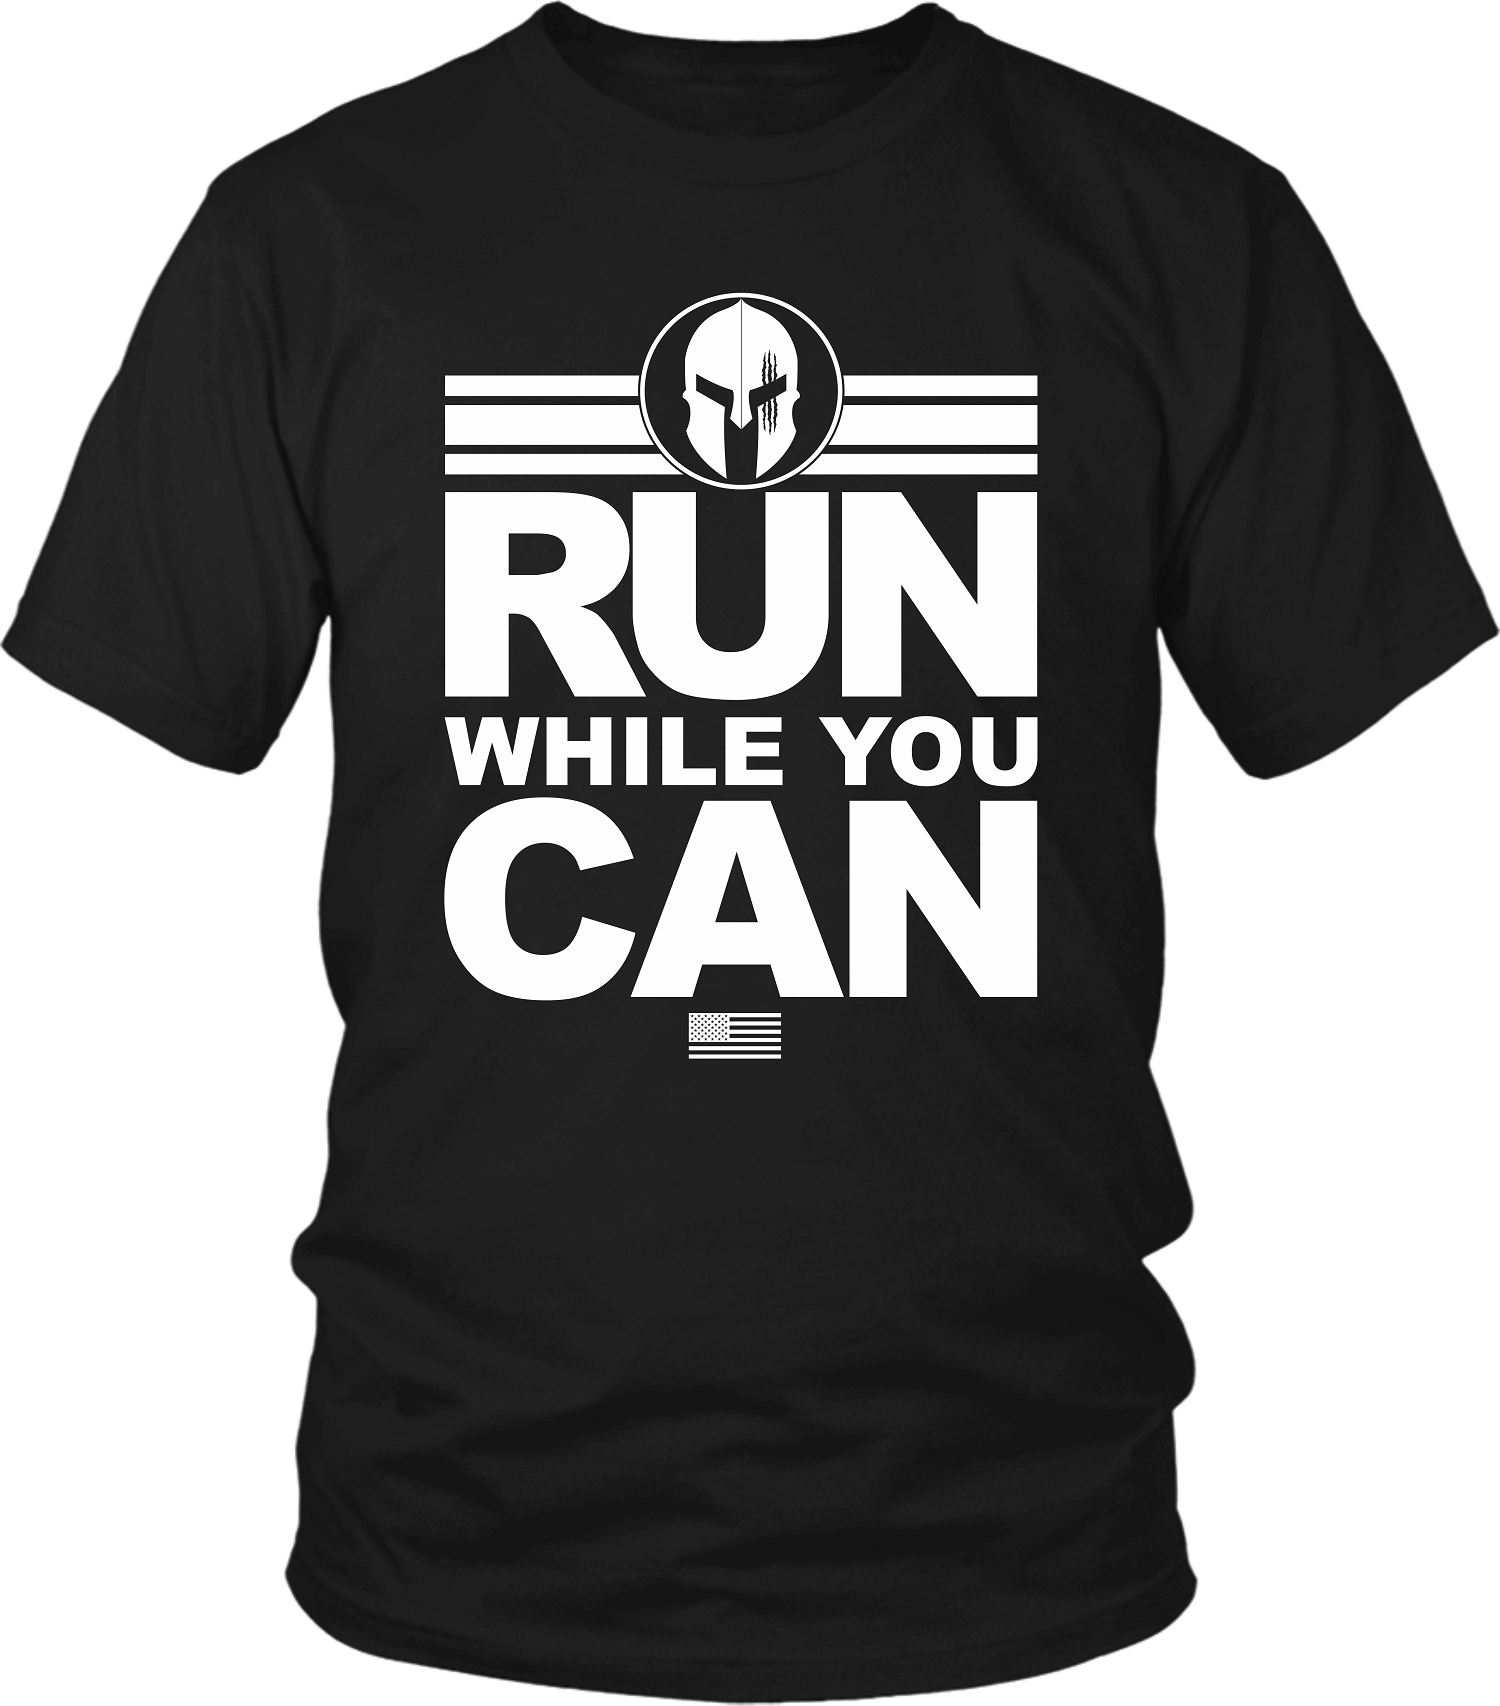 Gladiator Fitness - Run while you can T-shirt - xpertapparel